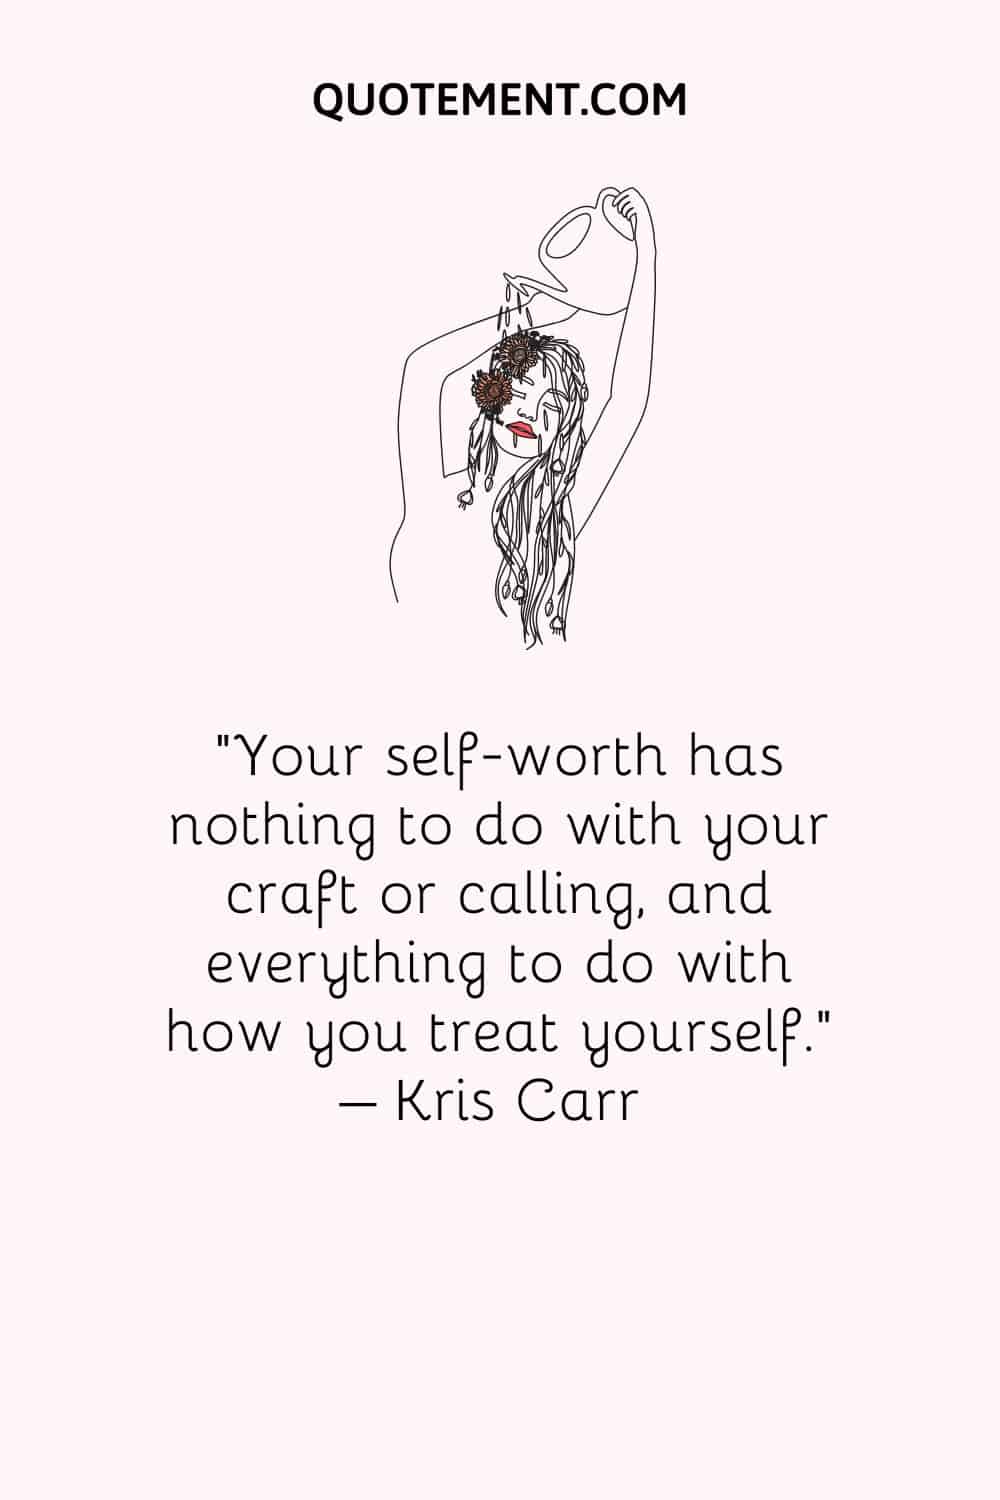 Your self-worth has nothing to do with your craft or calling, and everything to do with how you treat yourself